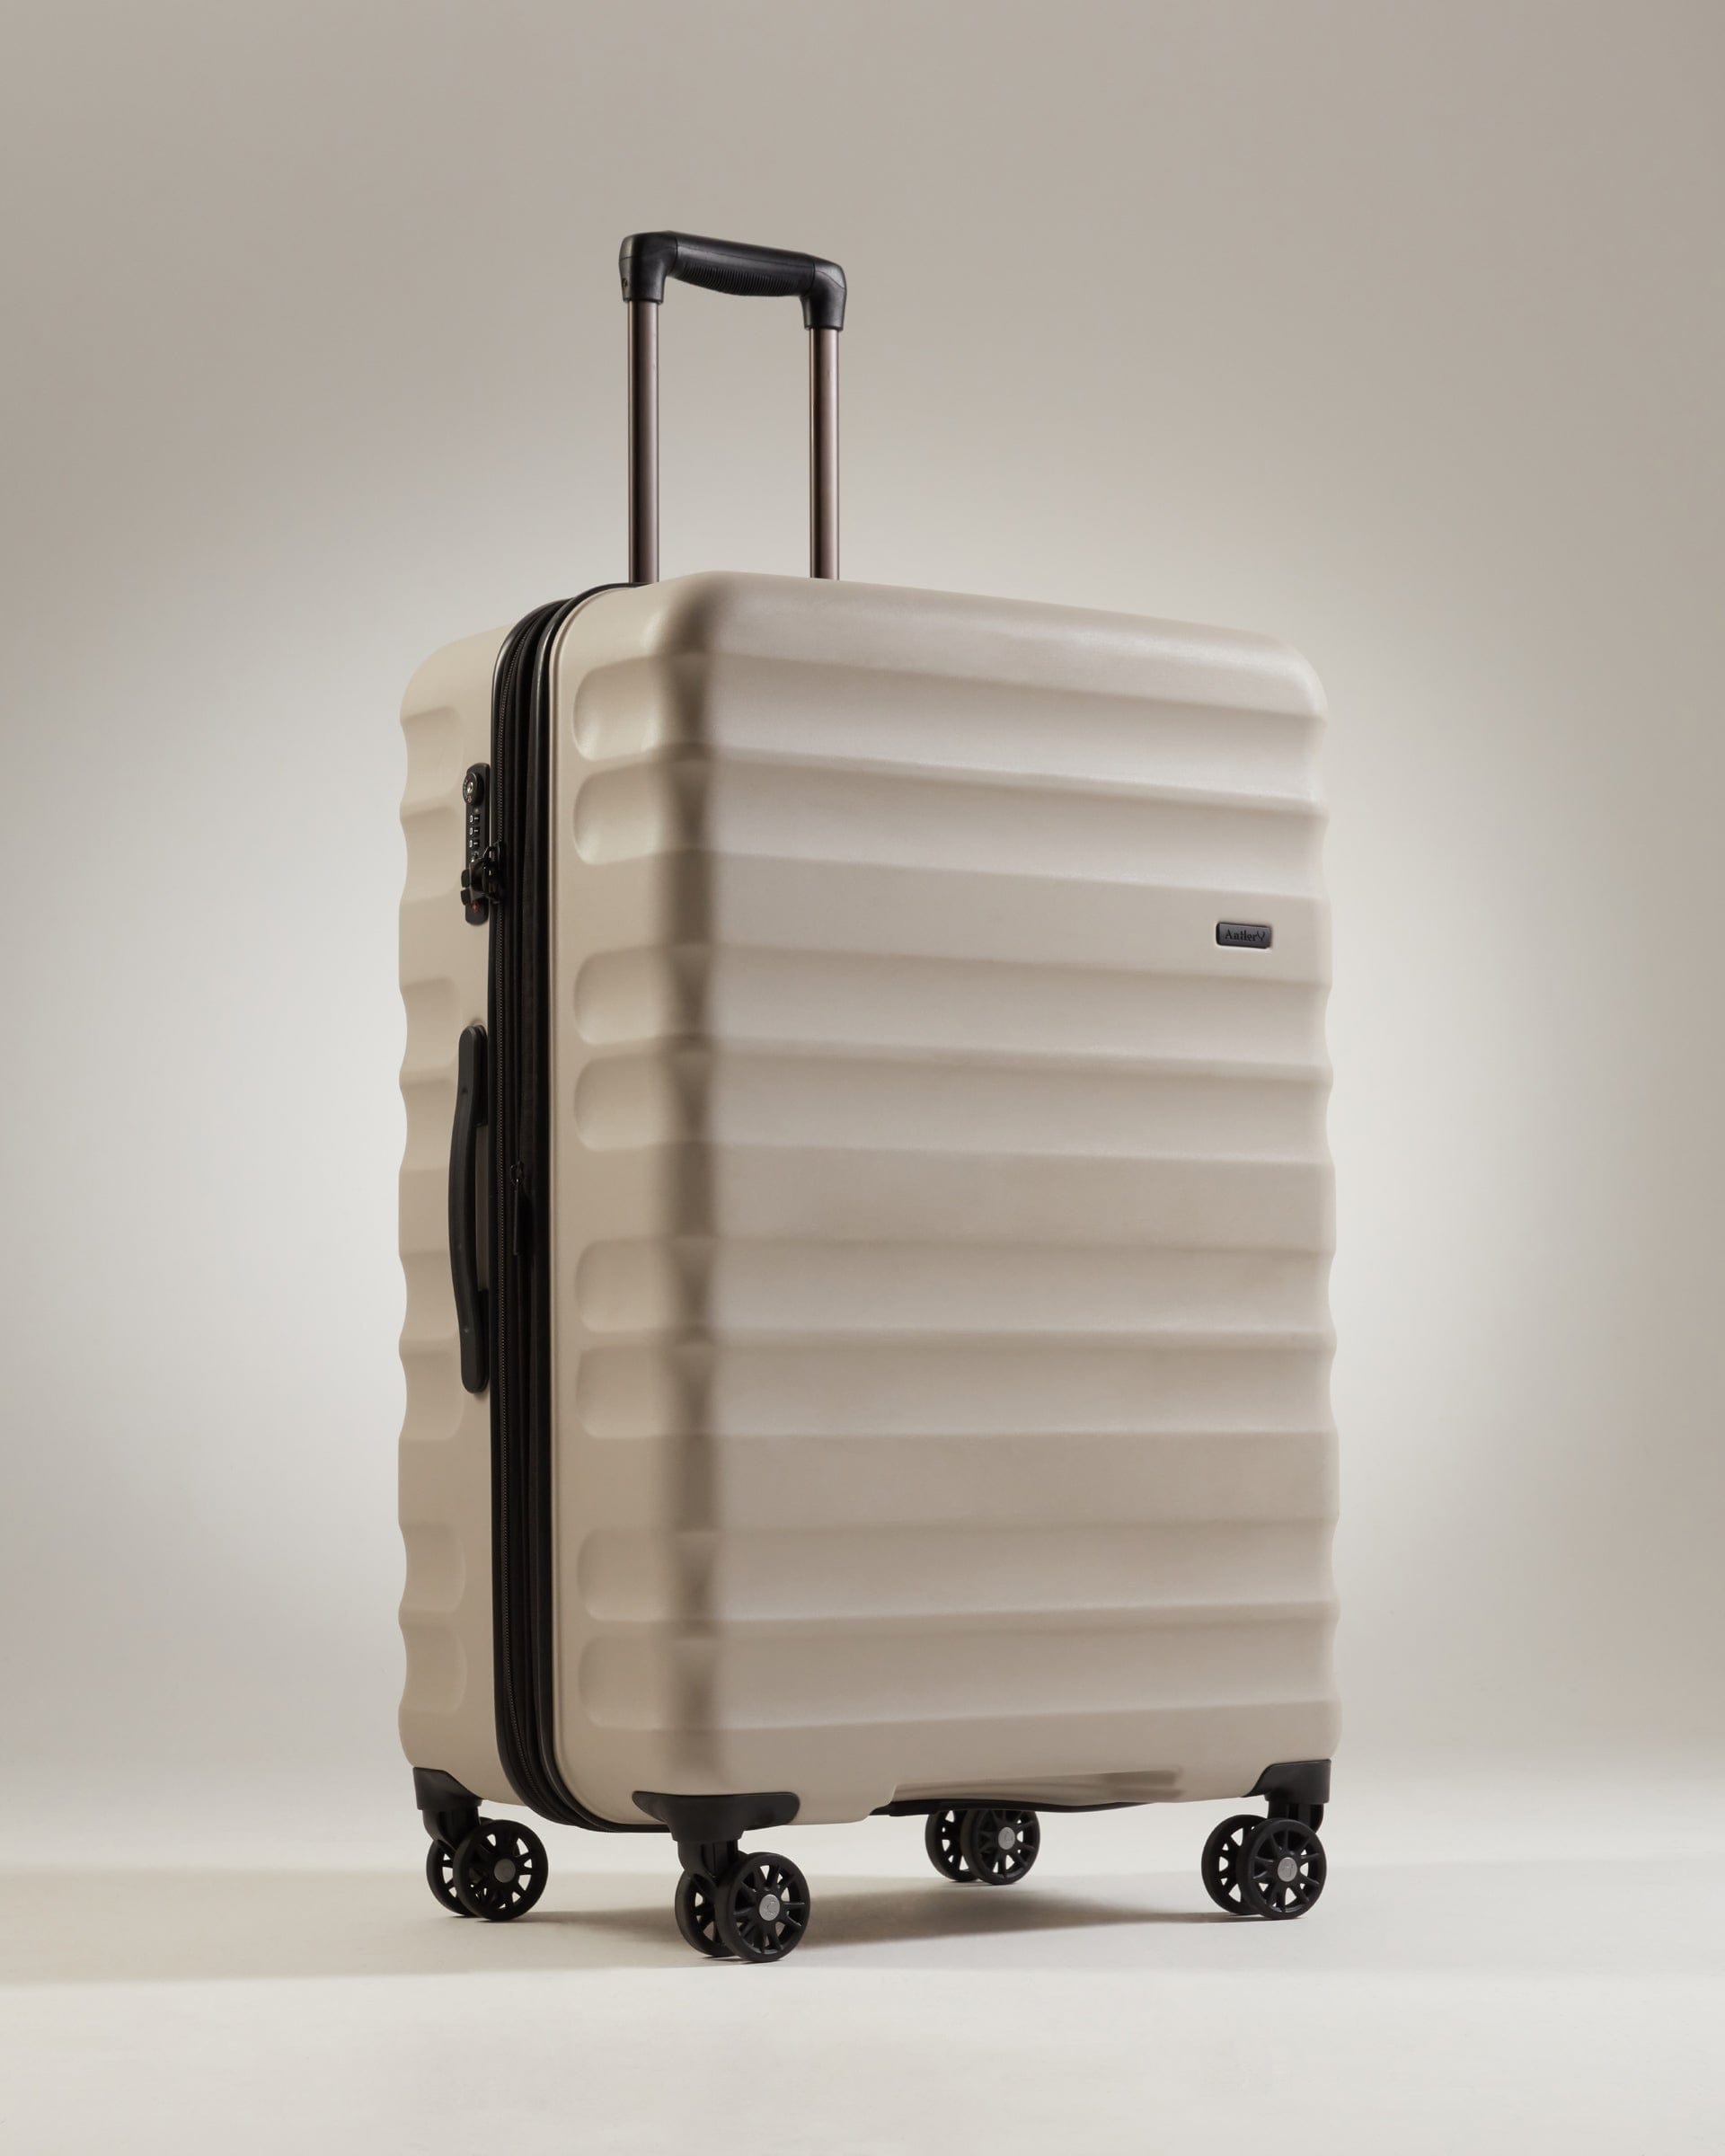 View Antler Clifton Large Suitcase In Taupe Size 80cm x 51cm x 34cm information